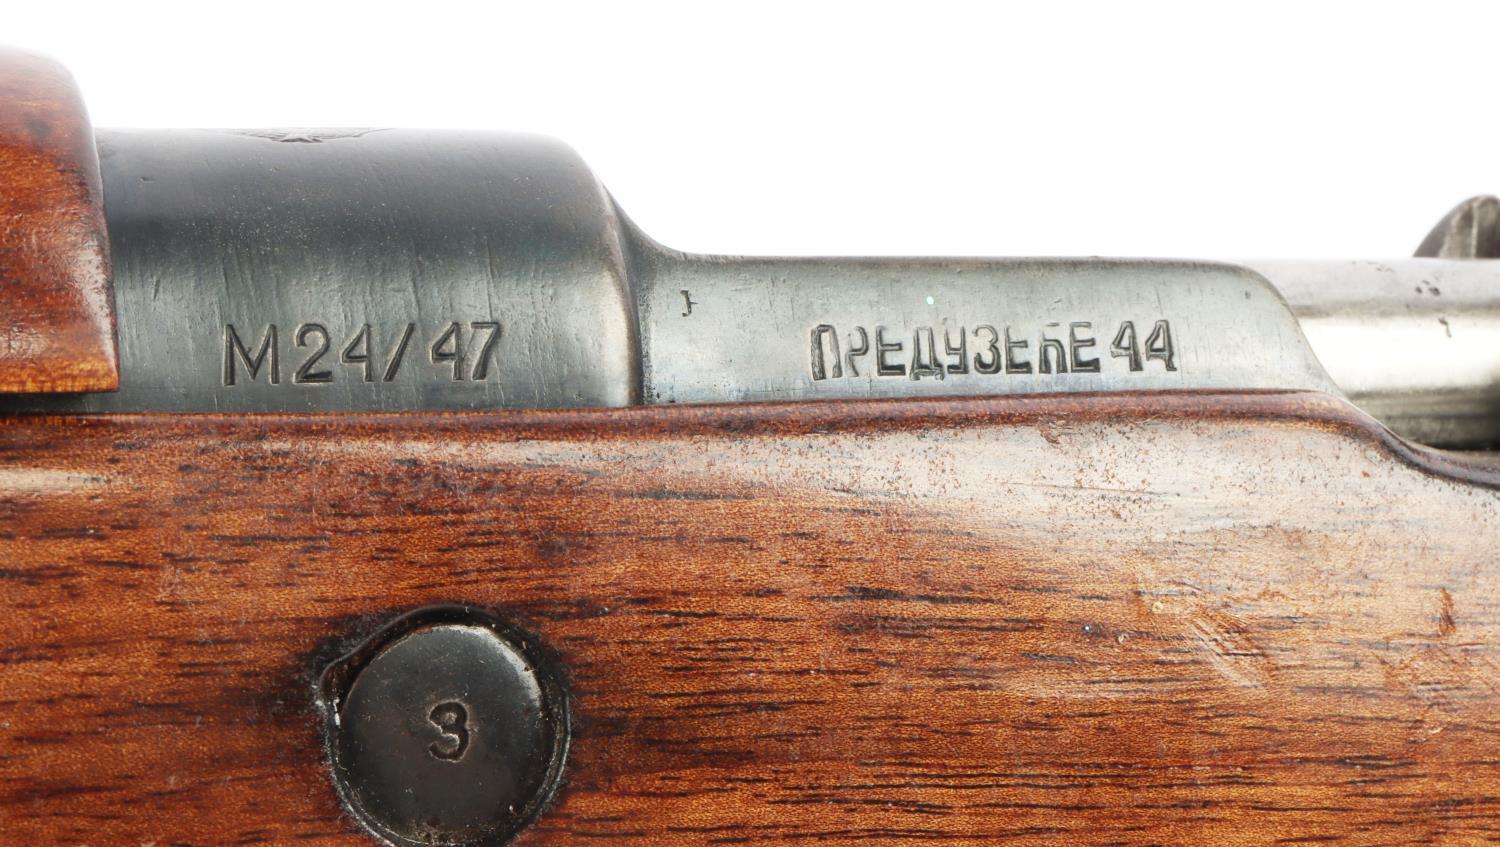 Educational Zone #33 - Refinishing a 24/47 Mauser